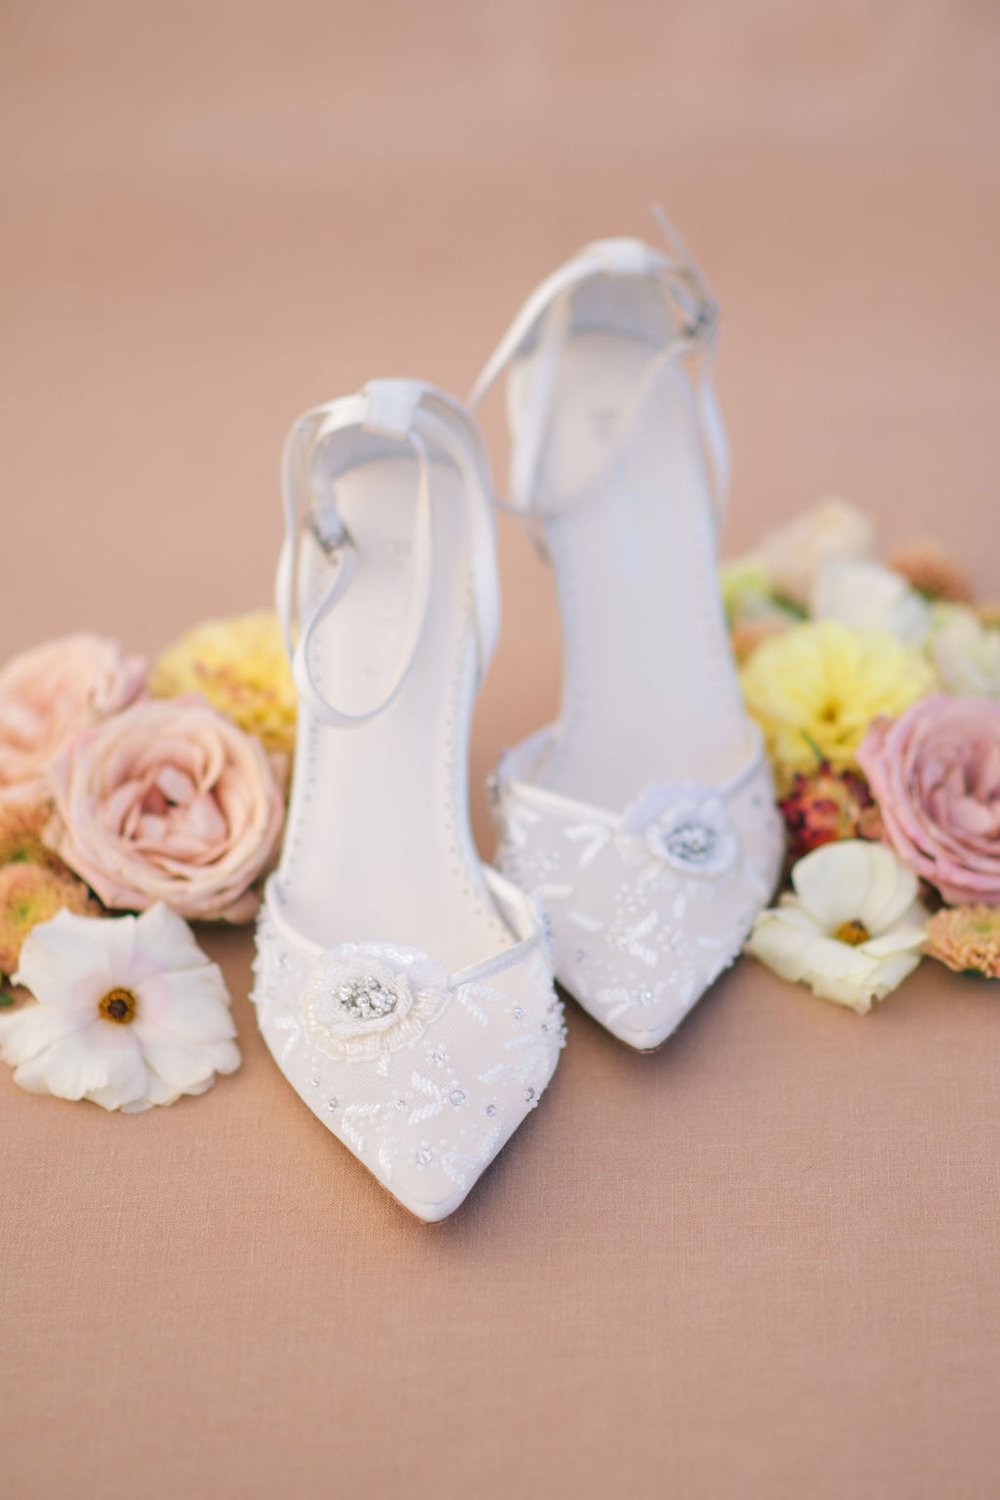 Bella Belle wedding shoes in a bed for fresh florals captured by Ugo Photography.